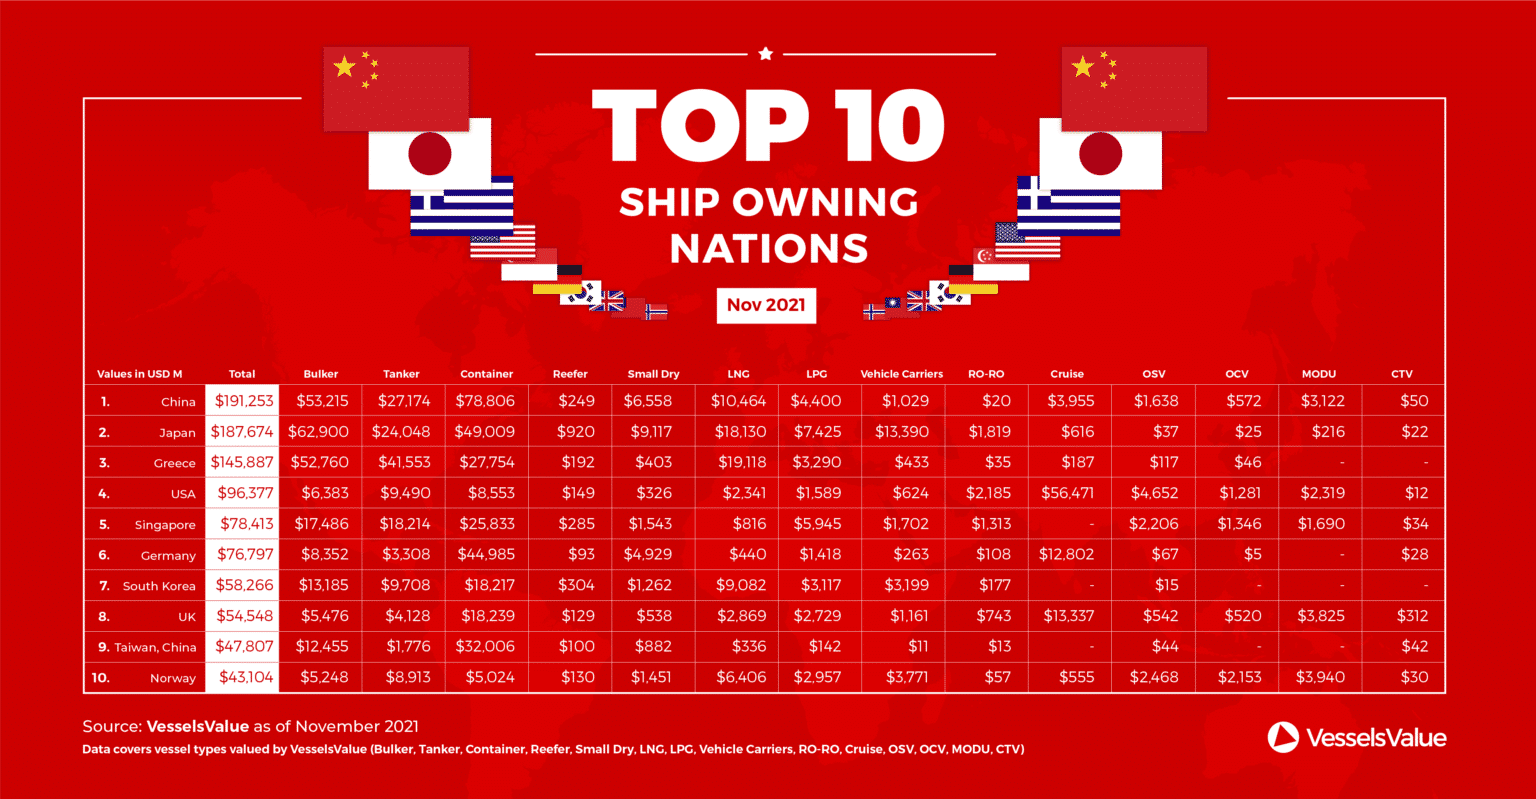 Full infographic for top 10 shipowning nations